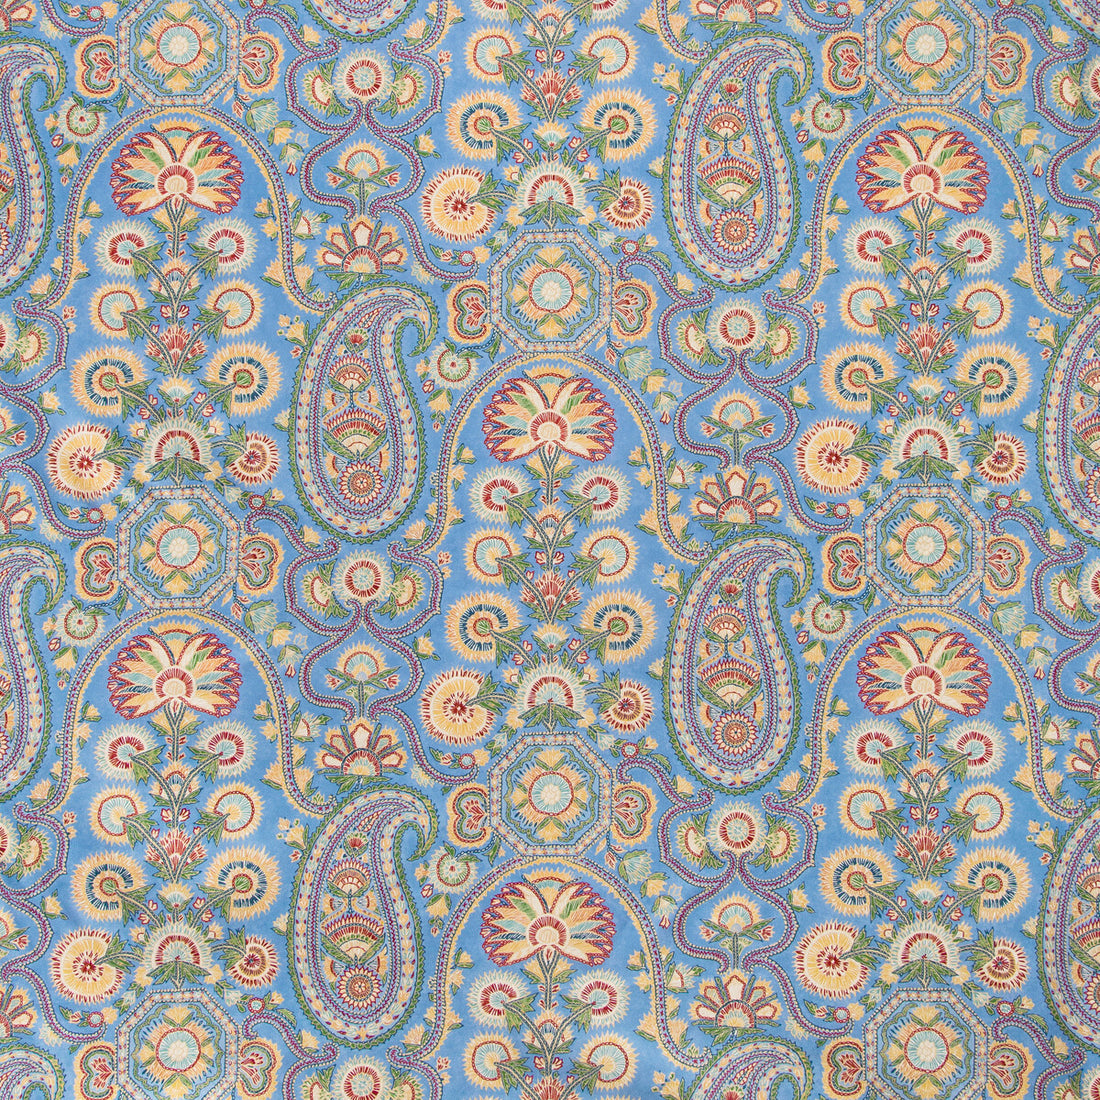 Saraya Print fabric in cornflower color - pattern 8020100.1519.0 - by Brunschwig &amp; Fils in the Grand Bazaar collection